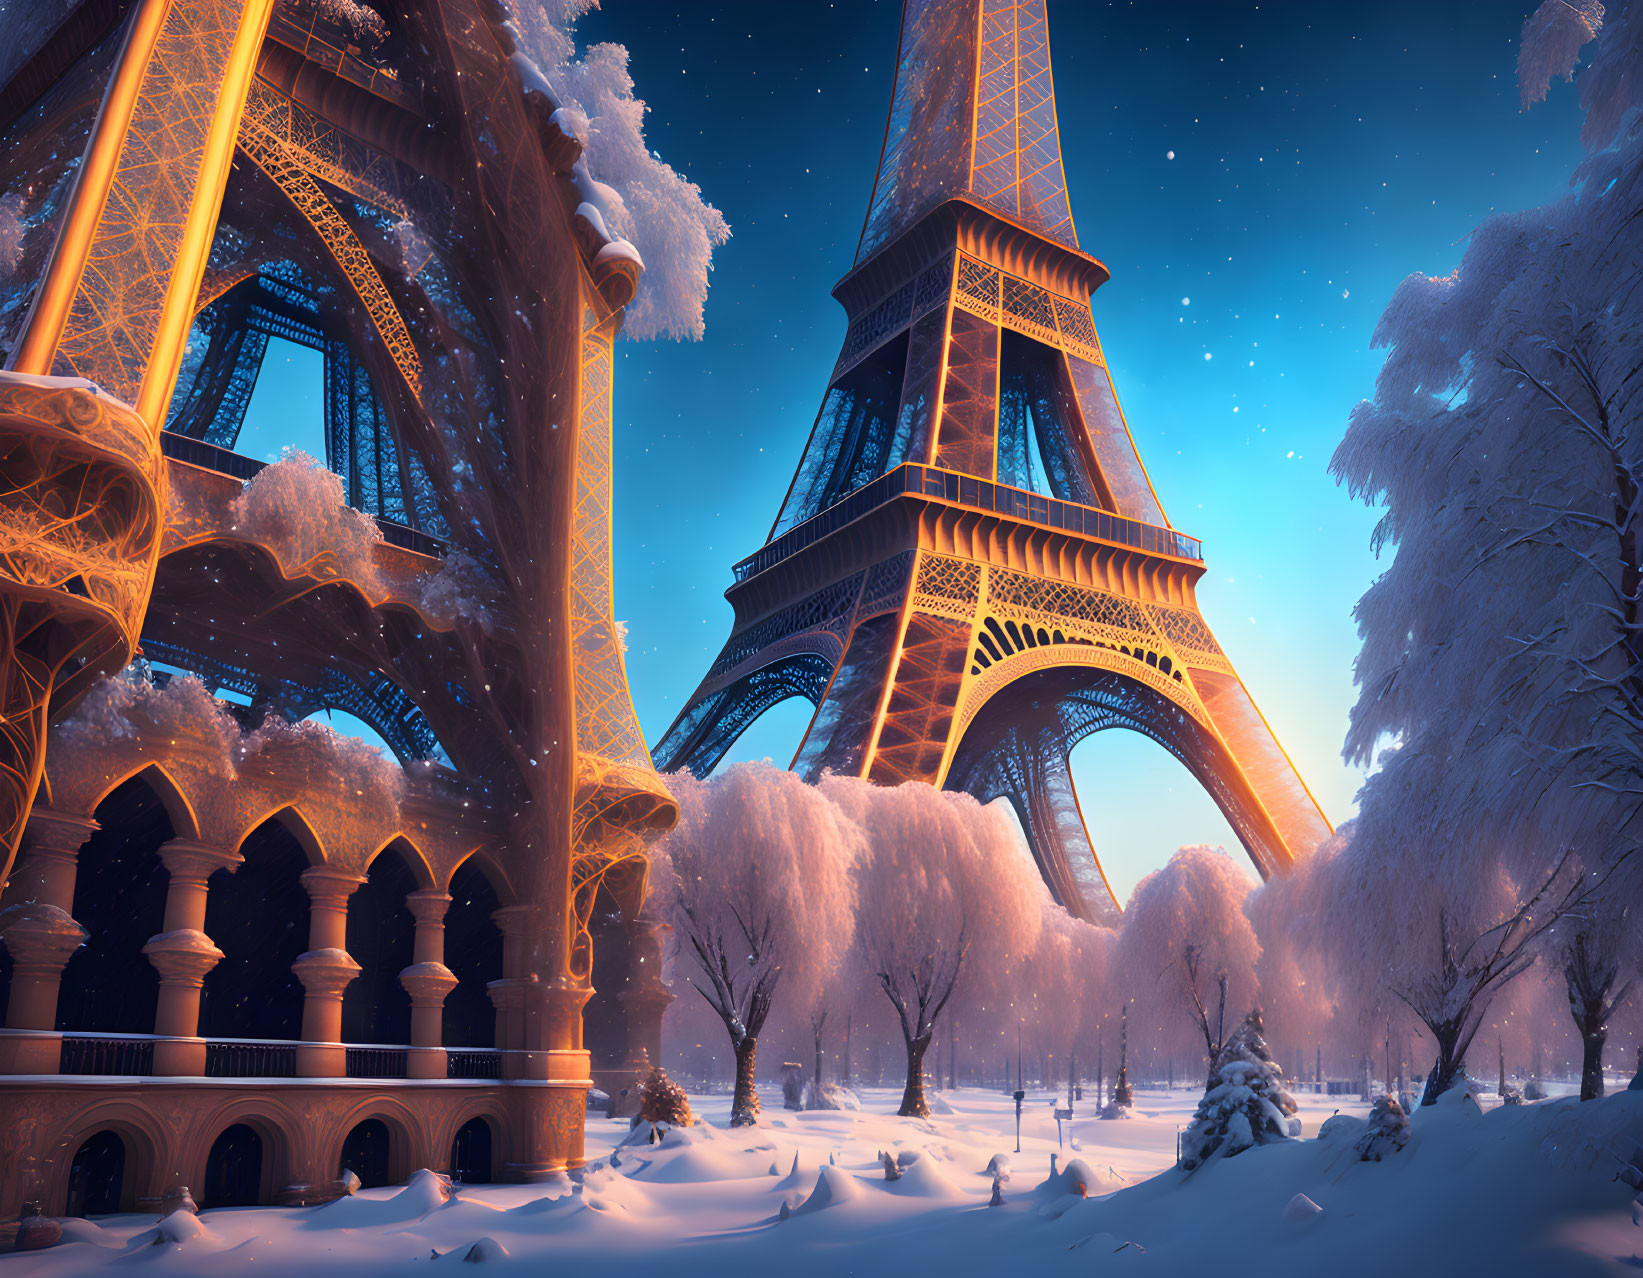 Snow-covered landscape with illuminated Eiffel Tower at twilight